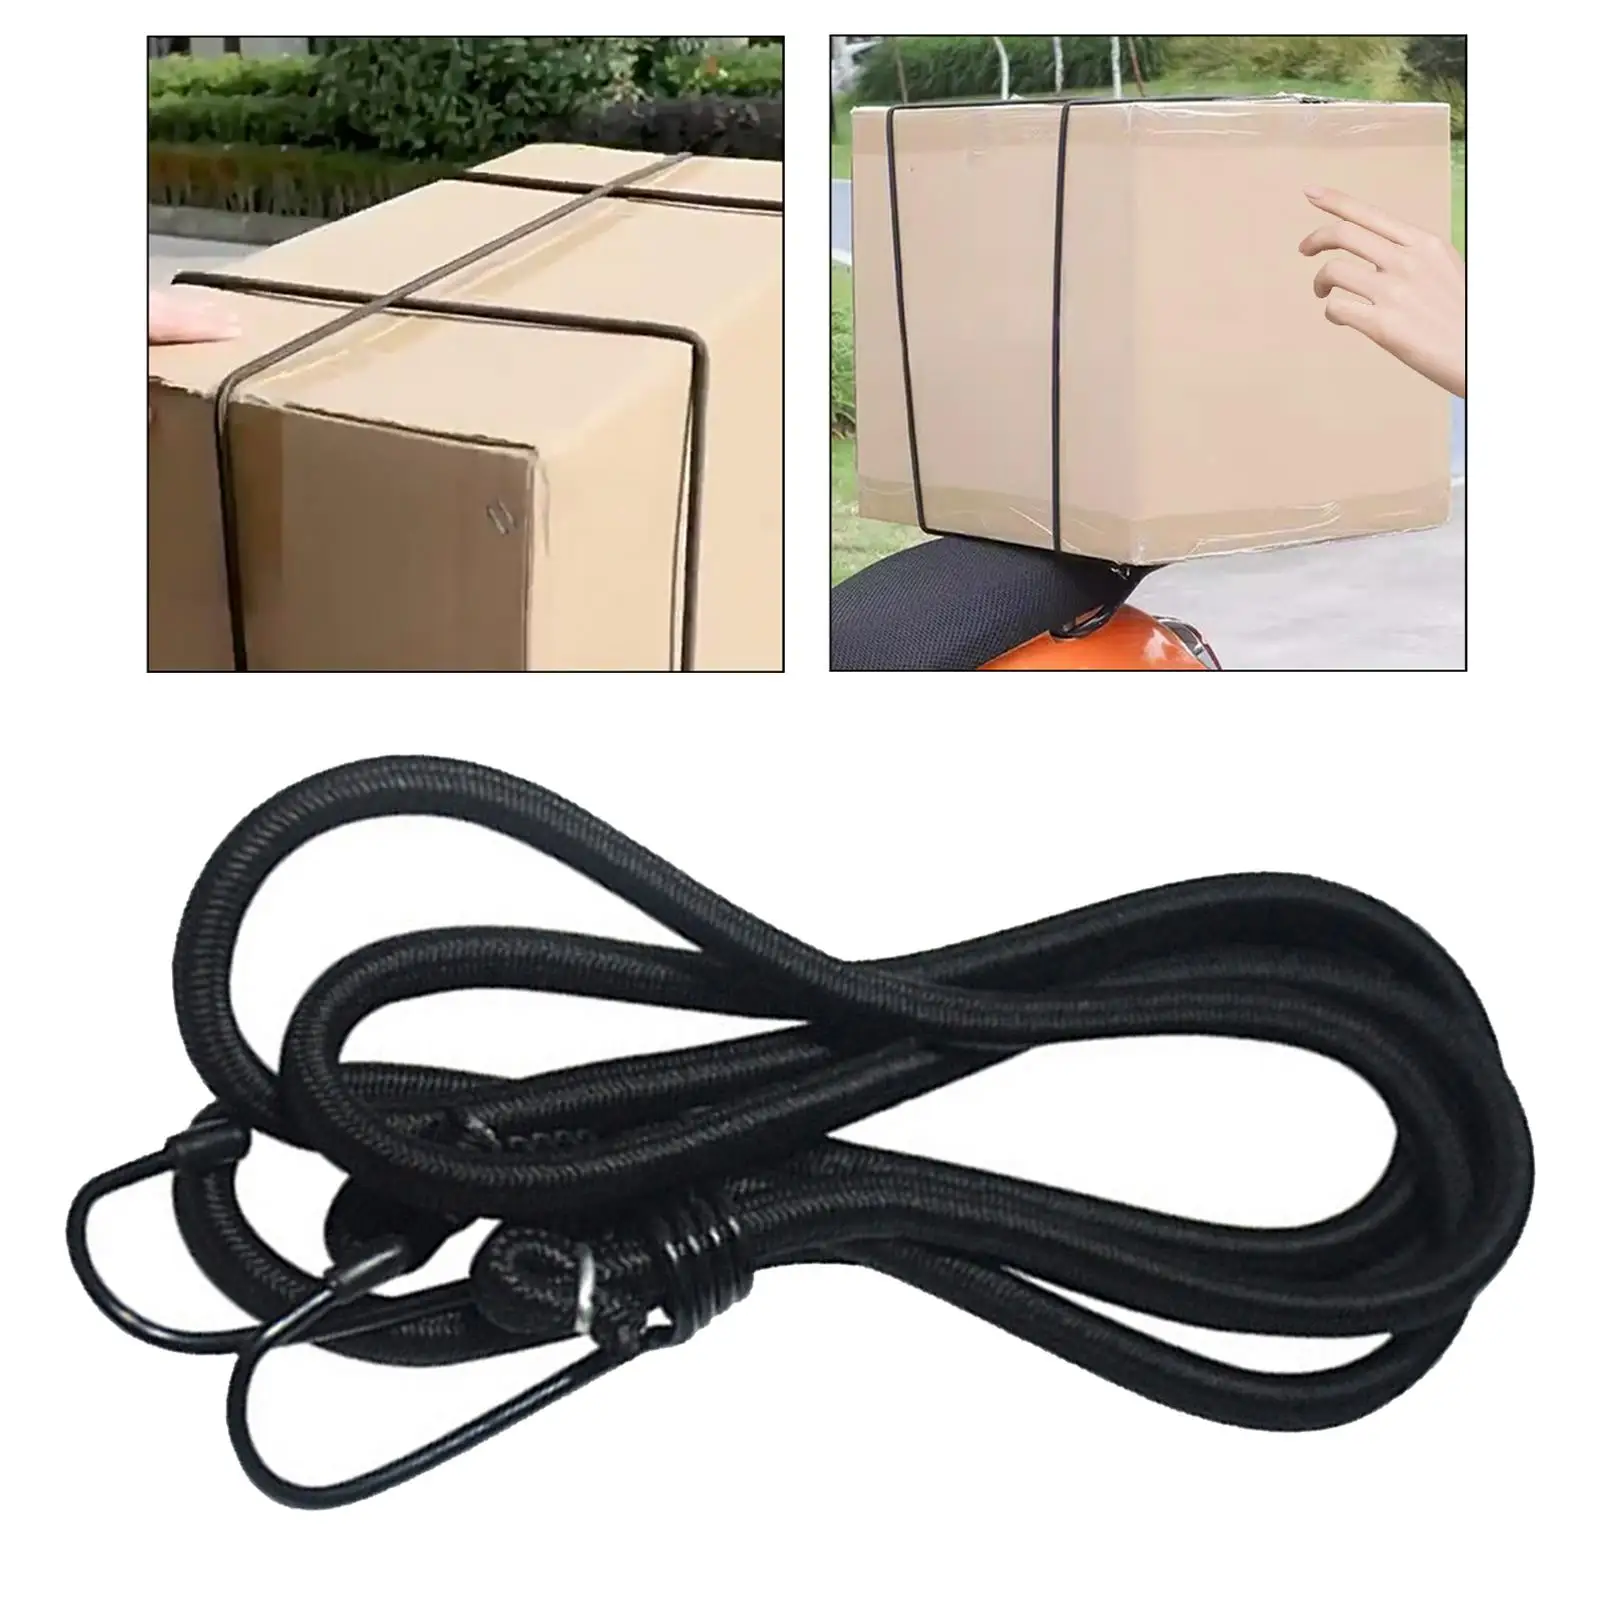 Bungee Cord Strong Elasticity 1.5M Long Convenient to Carry Easy to Install Tie Downs Straps with Hooks for Back Seat Tent Bike